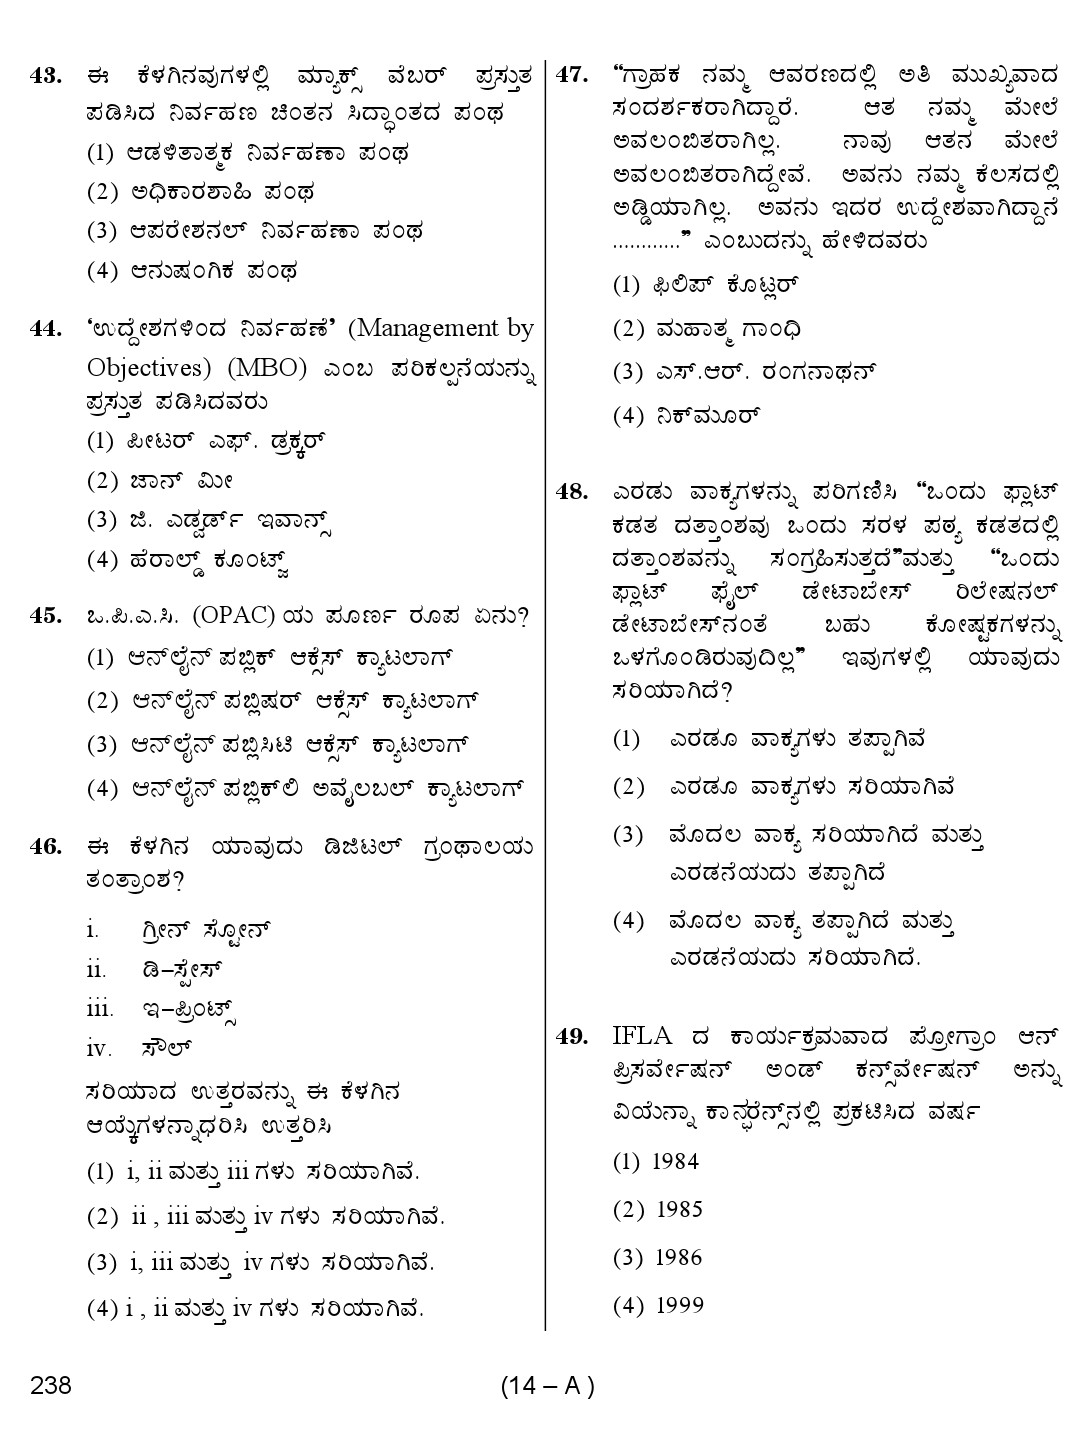 Karnataka PSC 238 Specific Paper II Librarian Exam Sample Question Paper 14